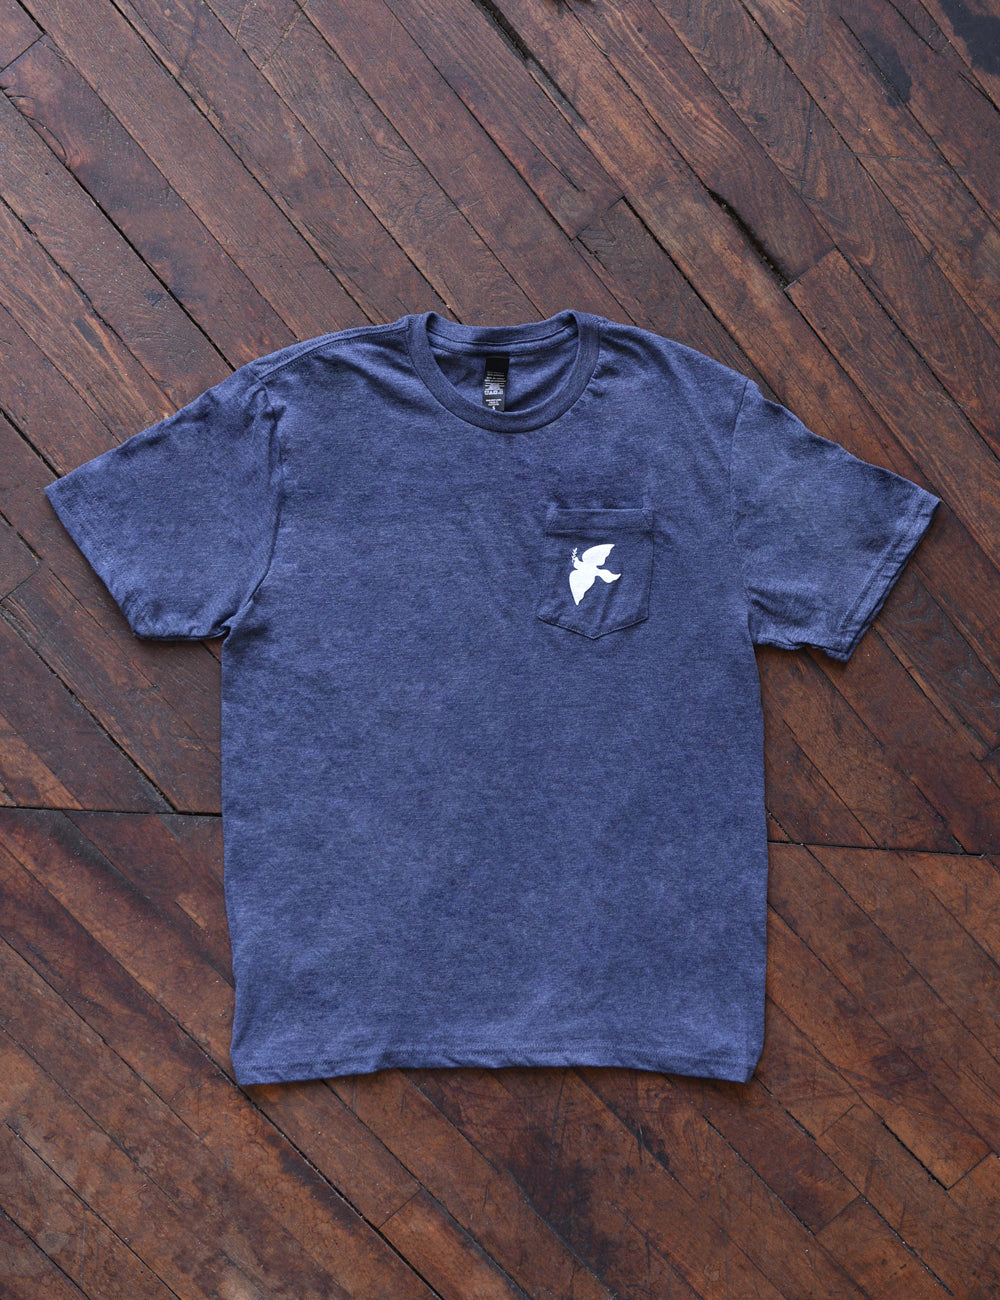 Top view of a Dove Pocket T-Shirt.